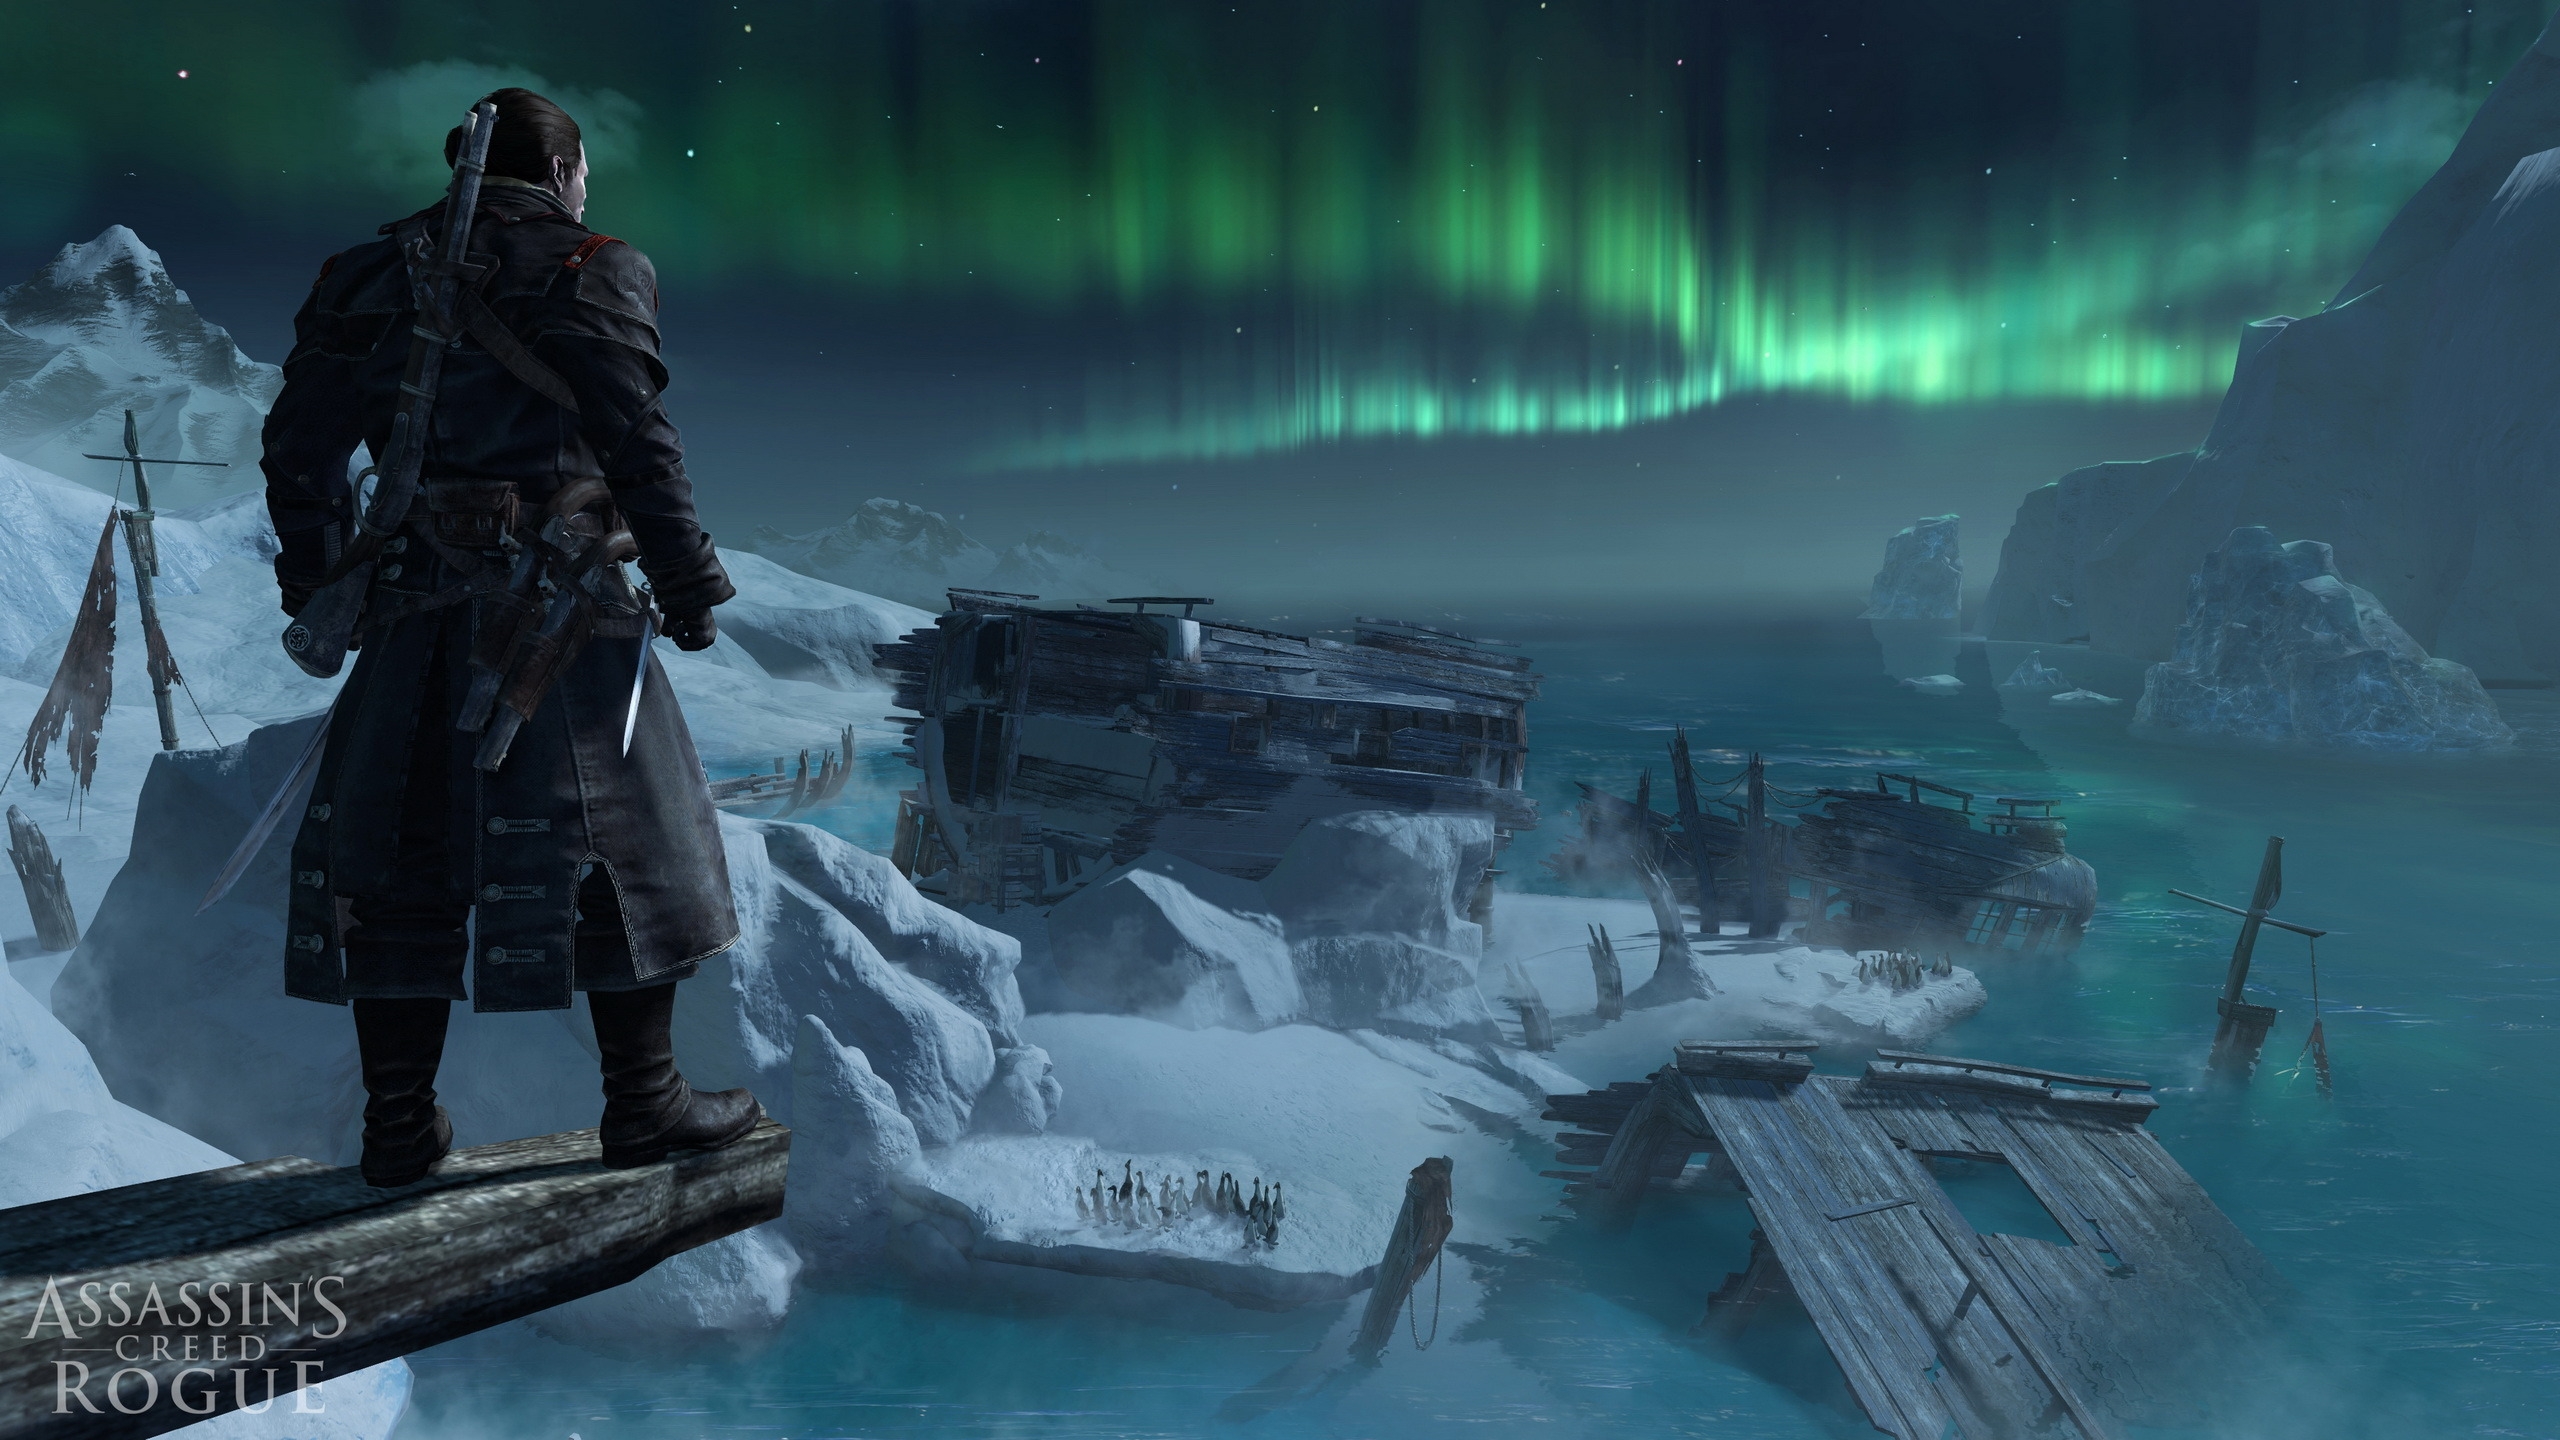 Assassins Creed Rogue Game for 2560x1440 HDTV resolution